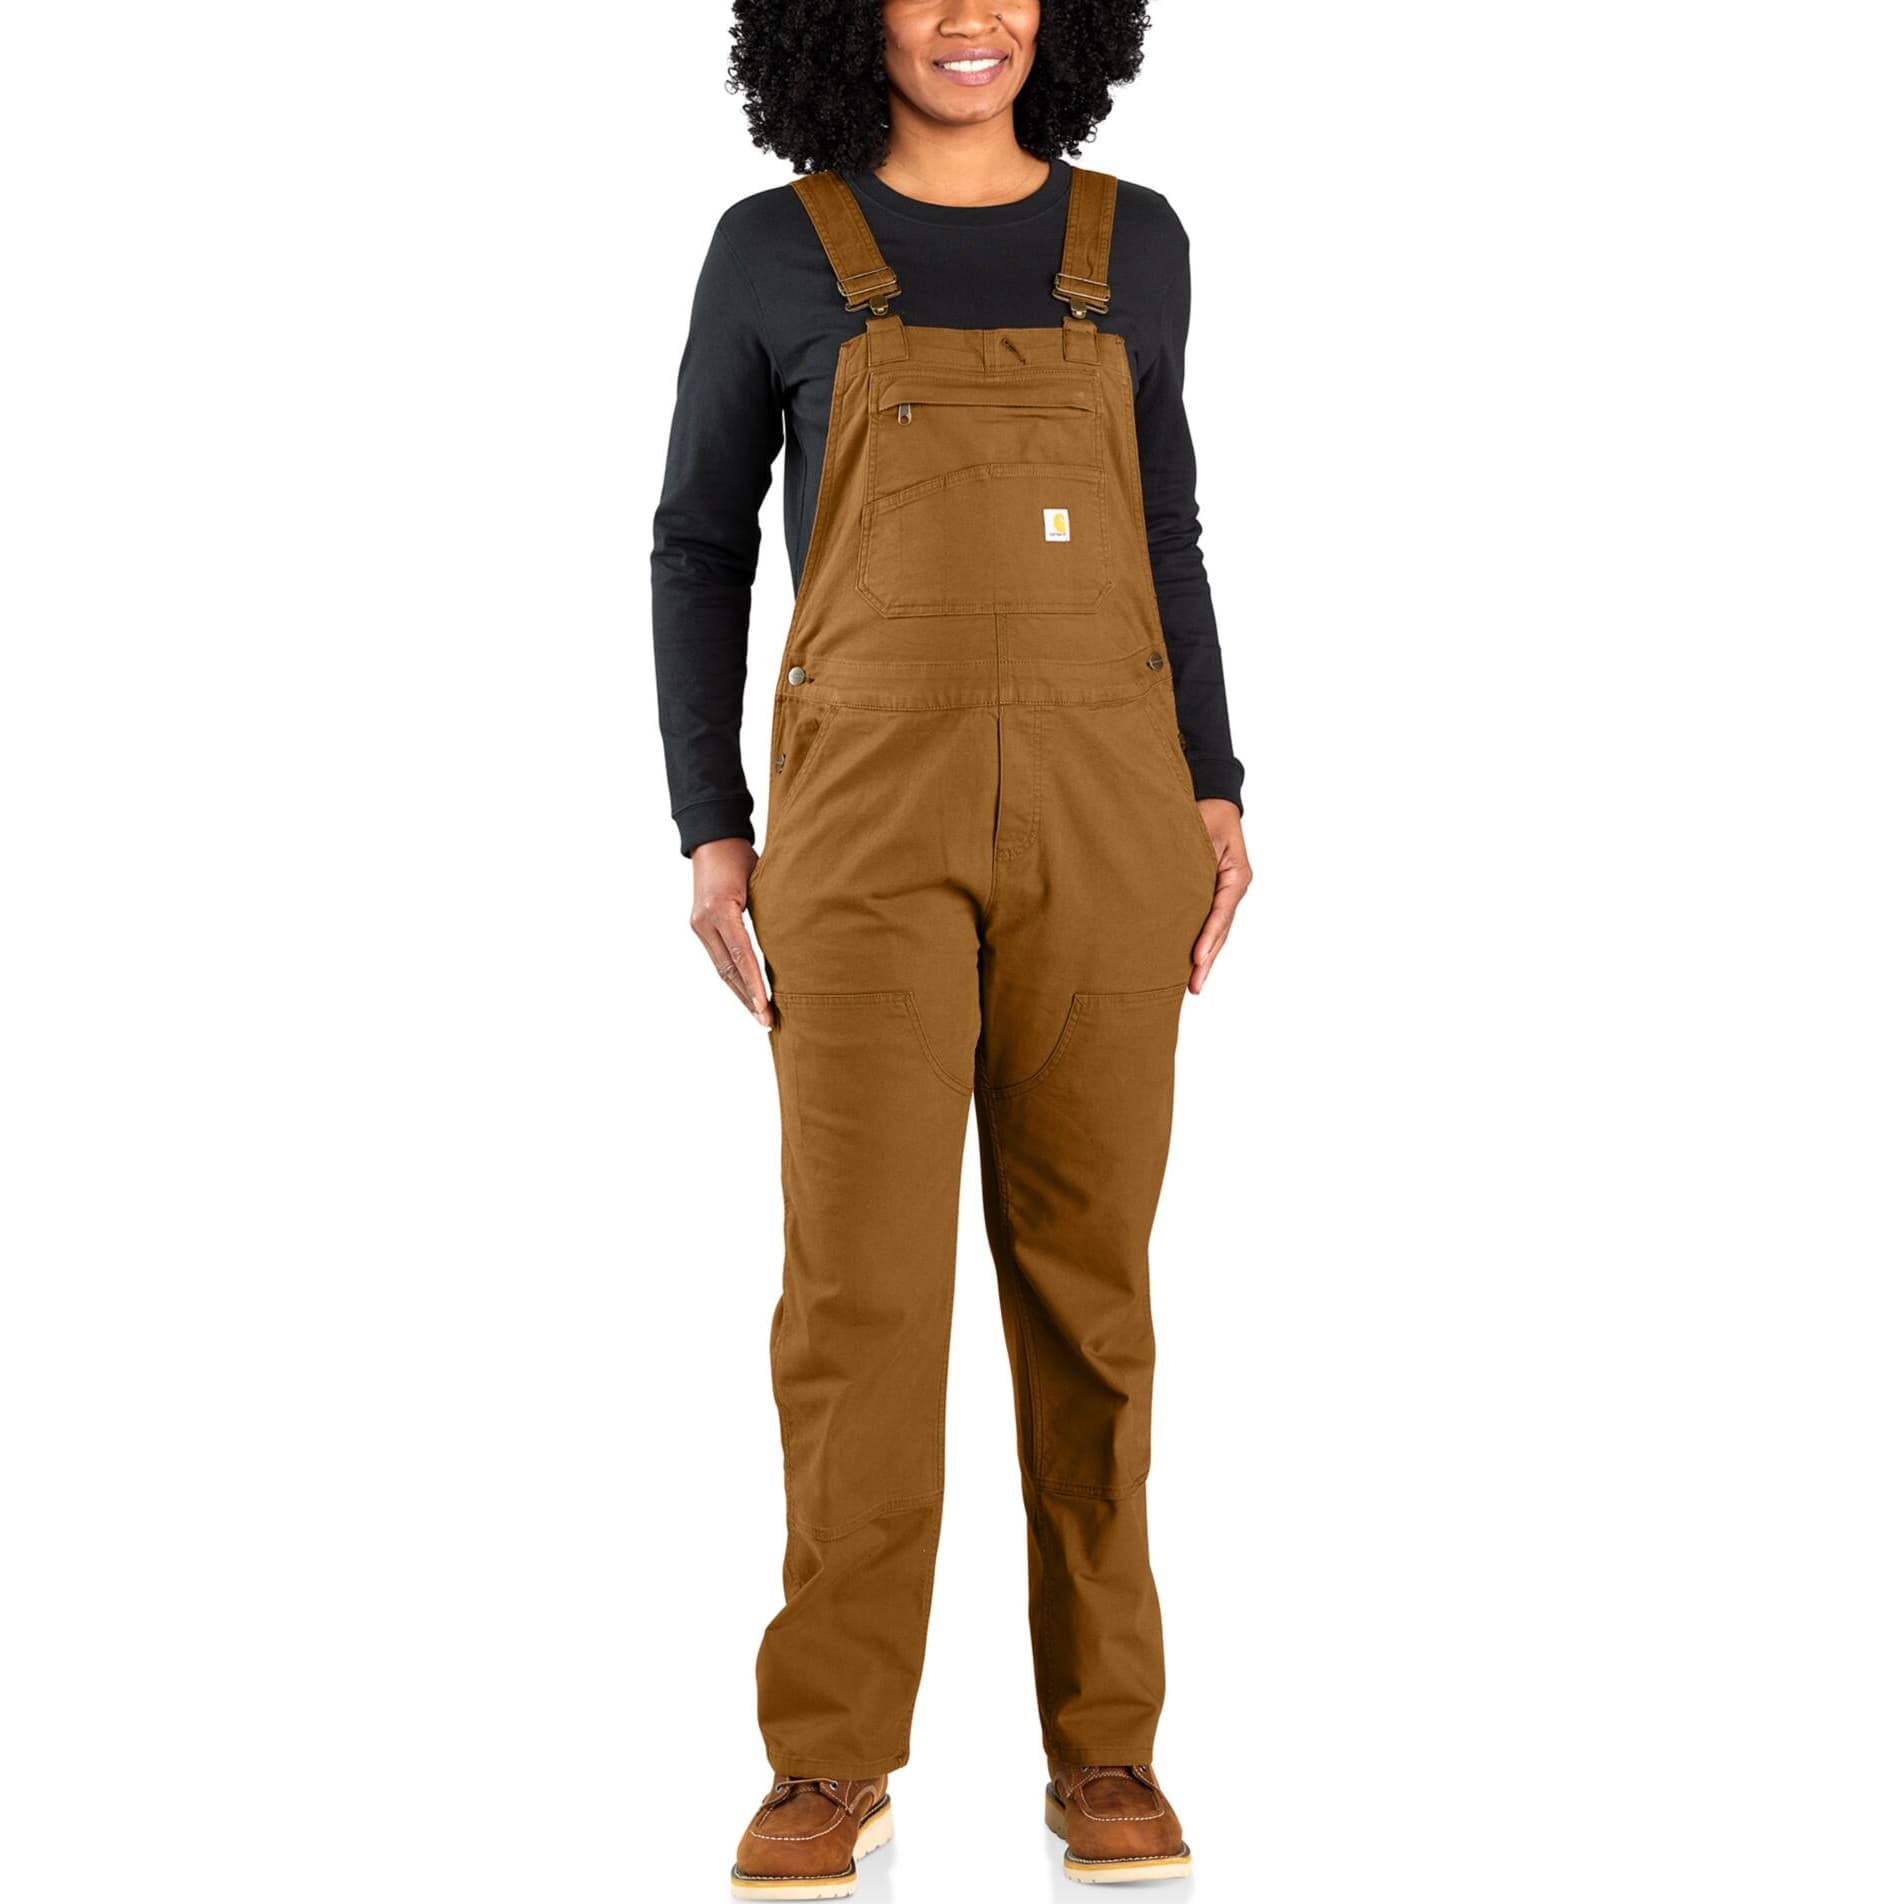 Carhartt on X: These #Carhartt Force Knit Utility #leggings are a